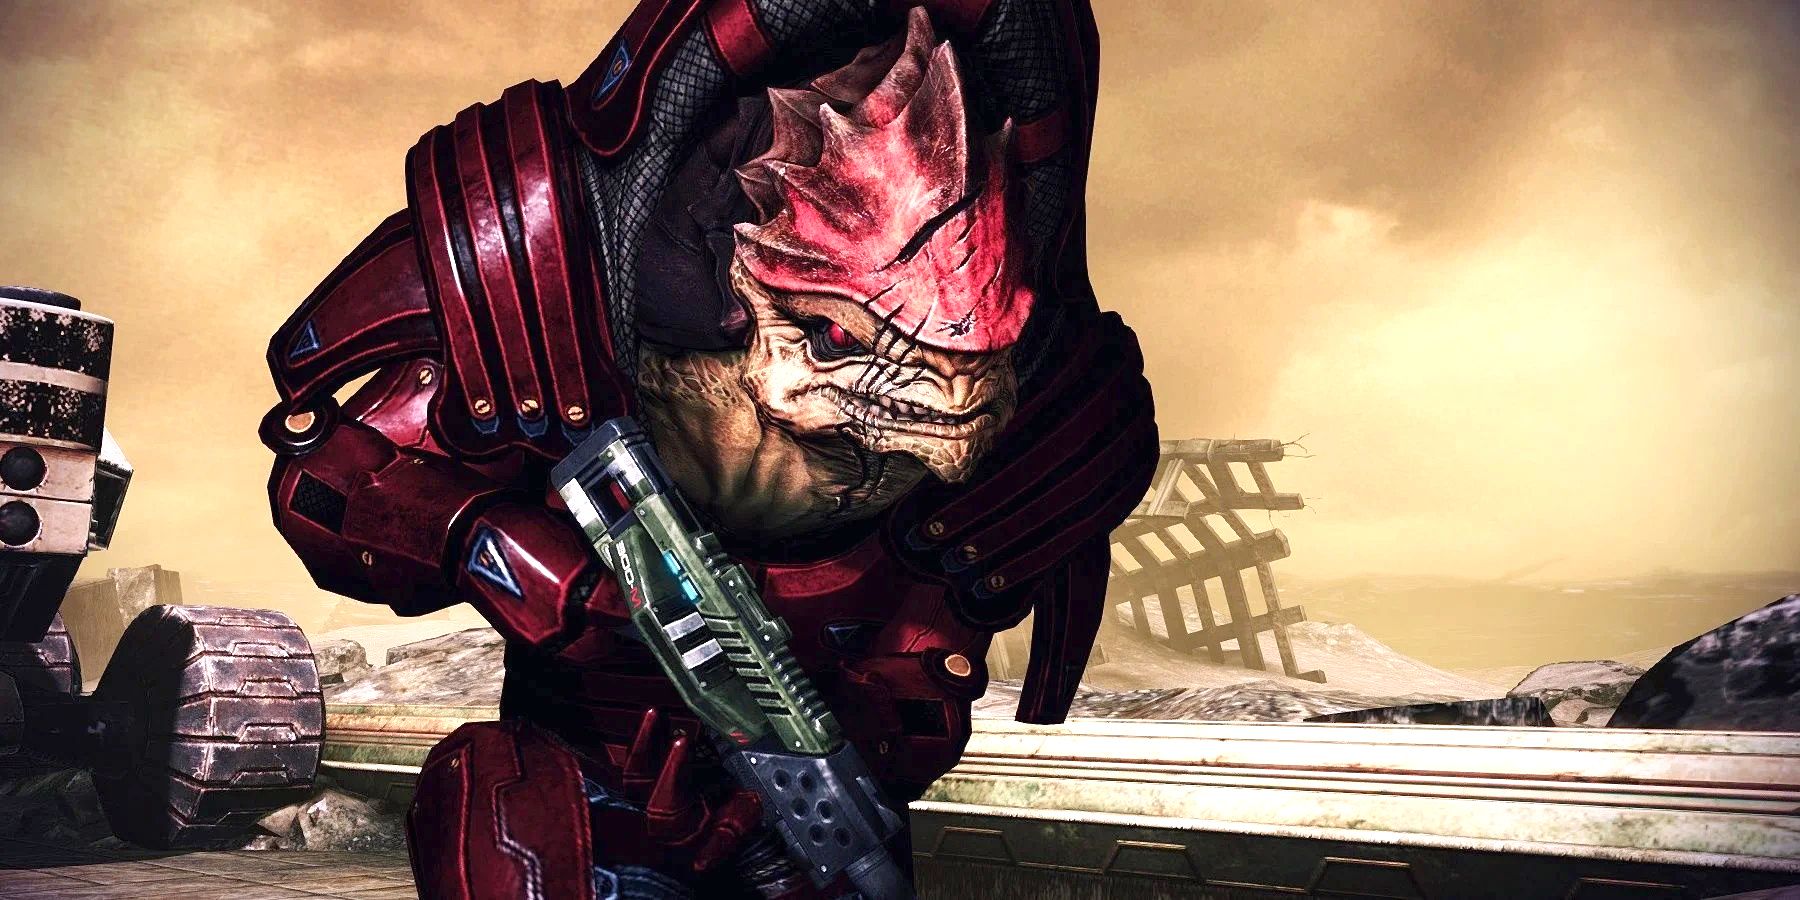 Udnot Wrex leads the charge in Mass Effect 3